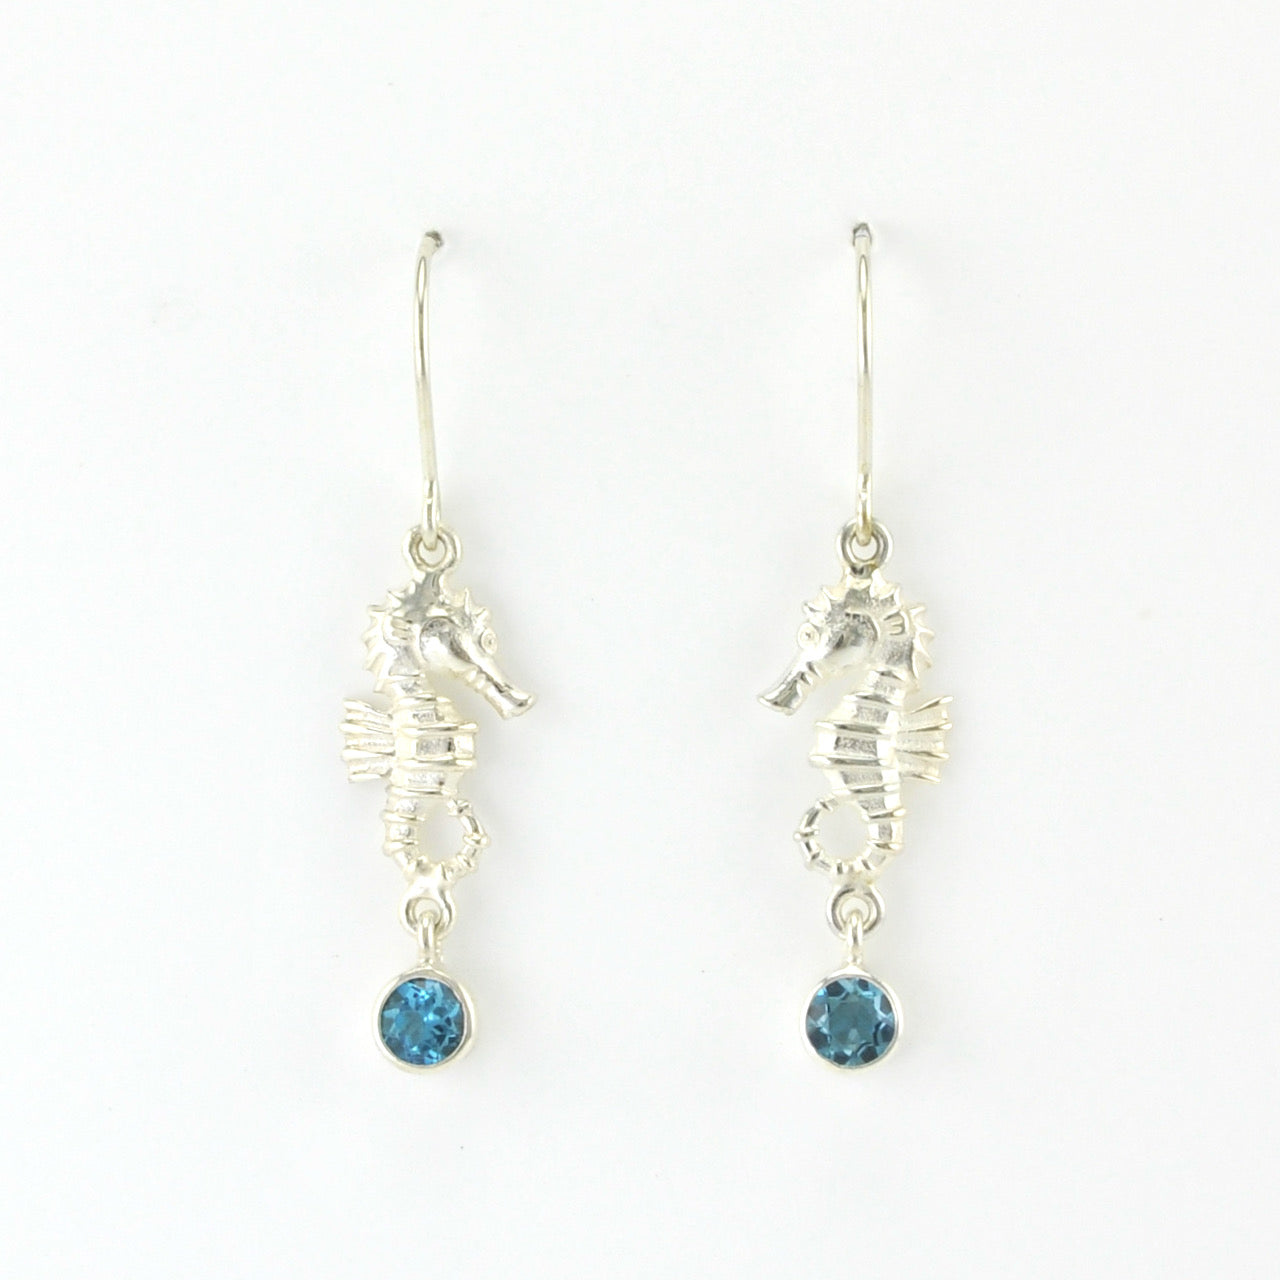 Silver Seahorse with Blue Topaz Earrings